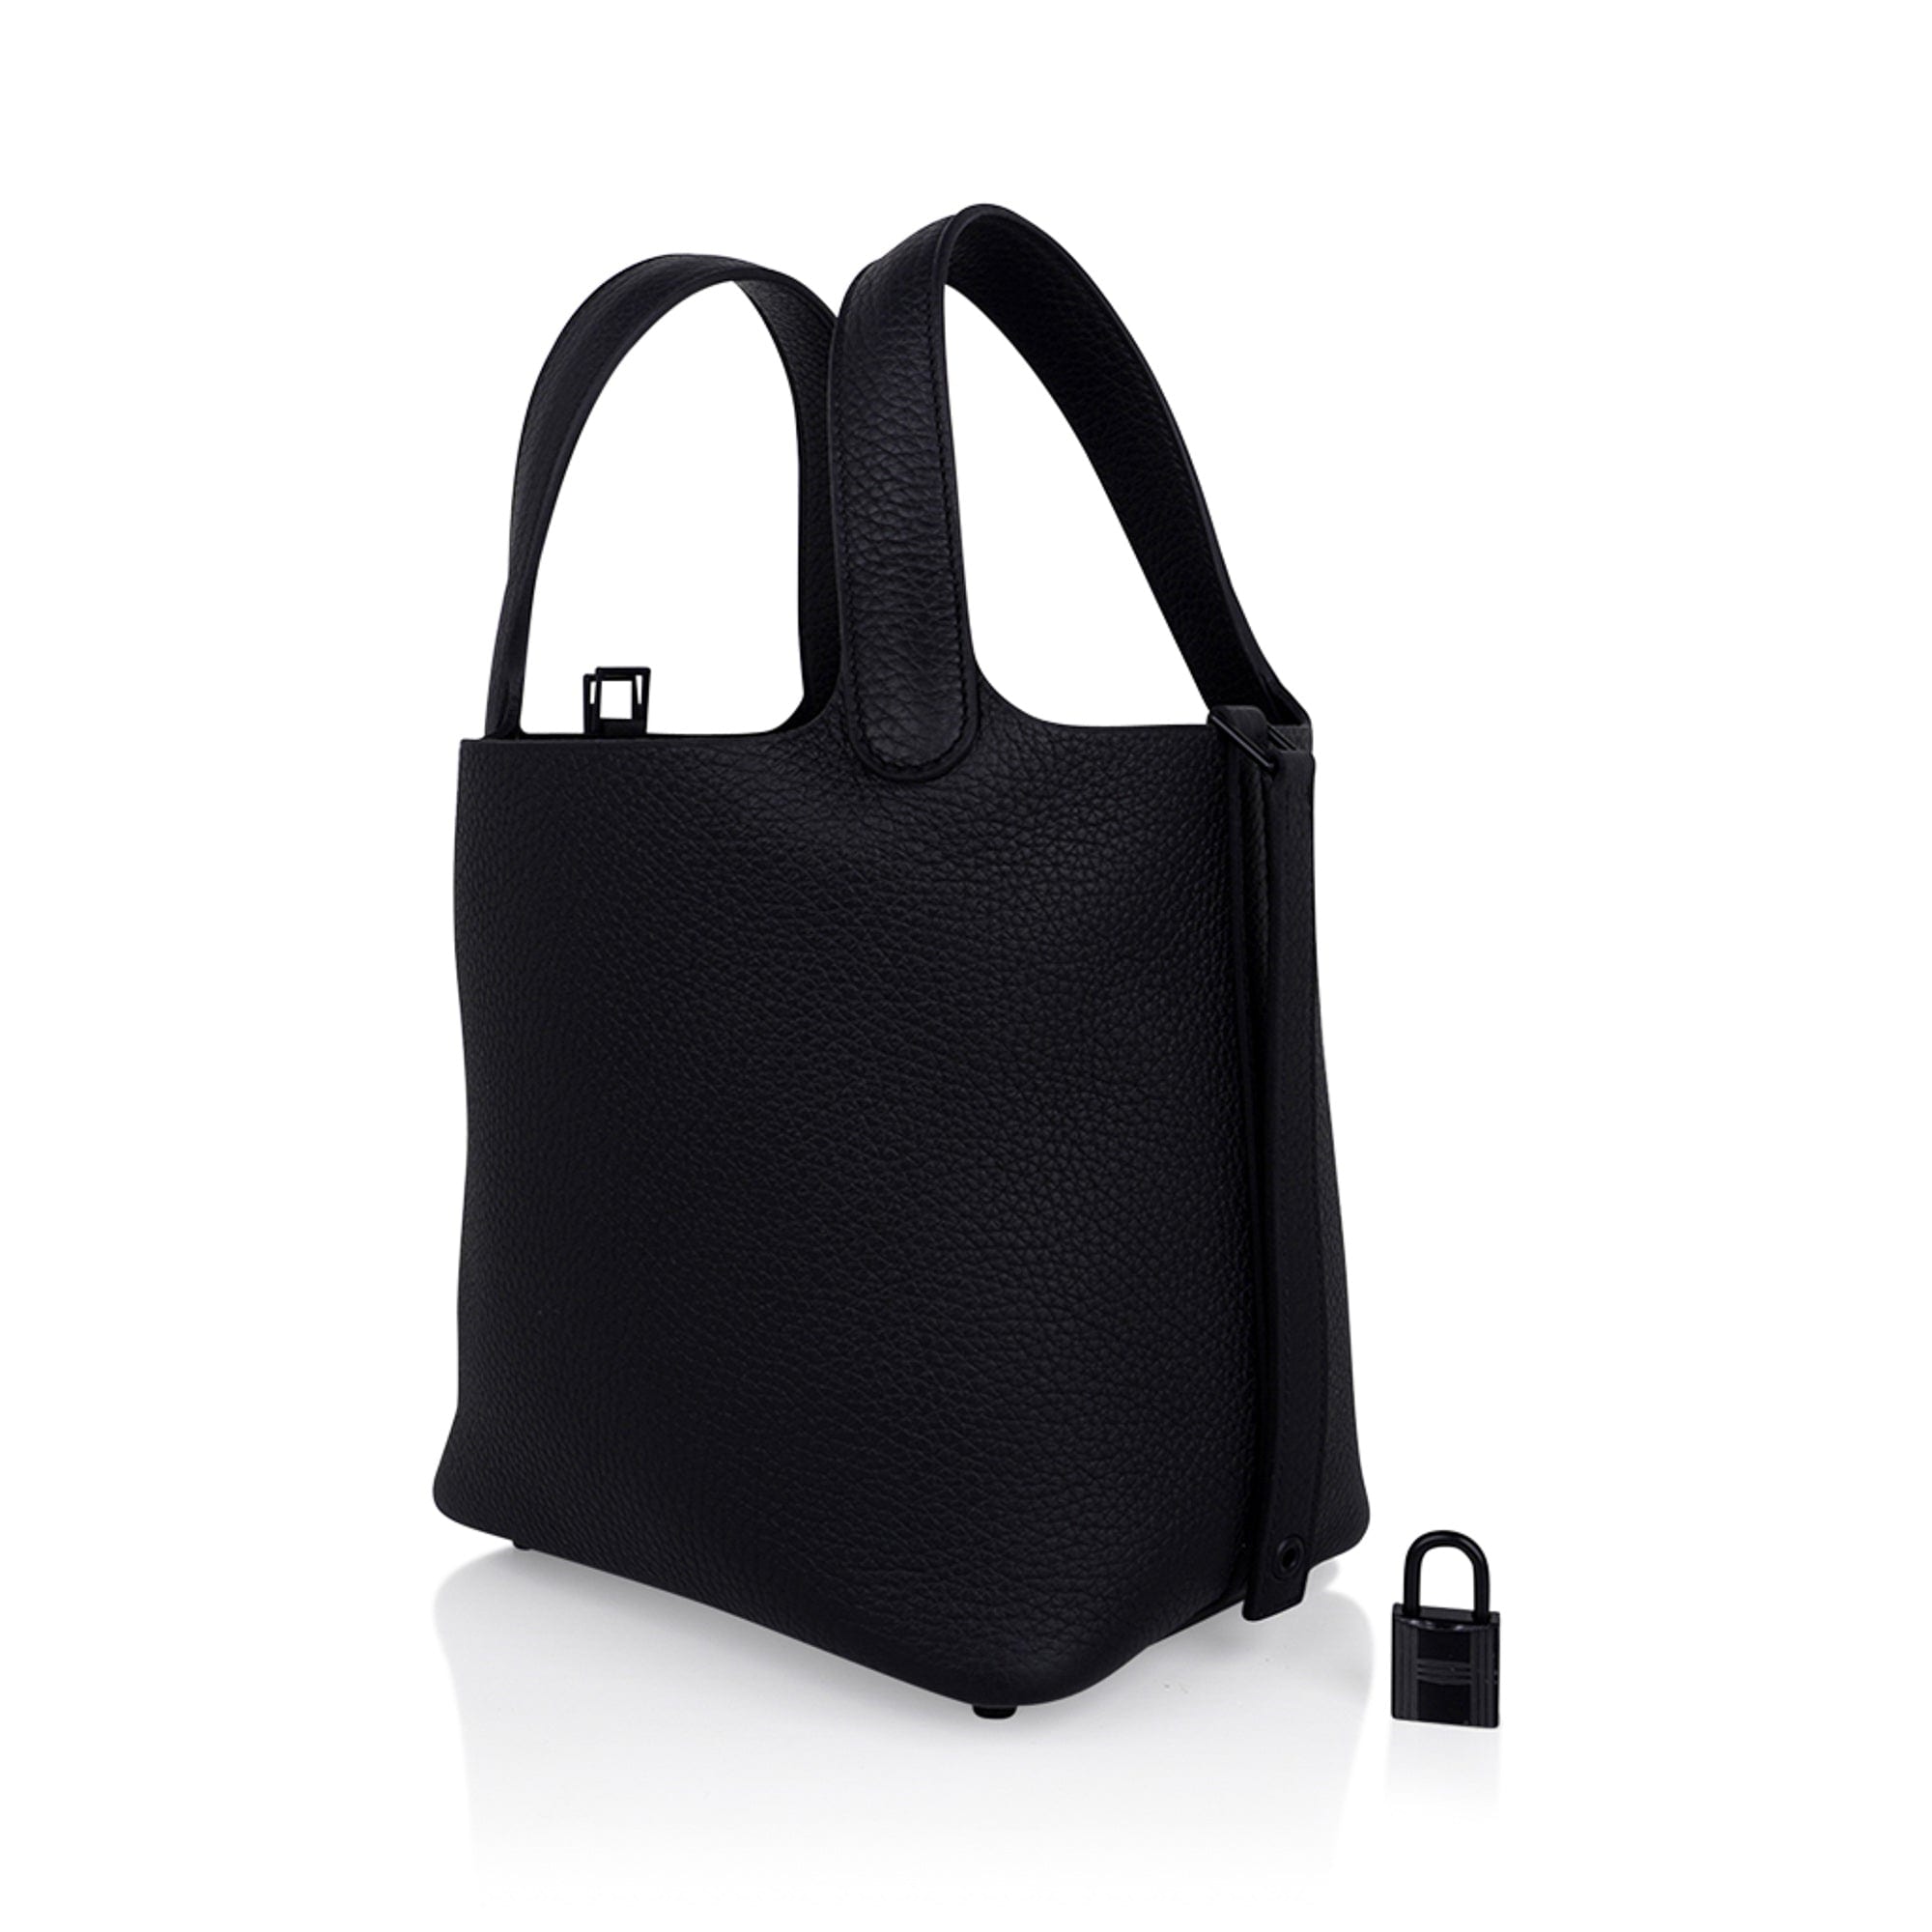 Hermès Picotin Lock 18 Black Clemence Leather Tote with Black Hardware